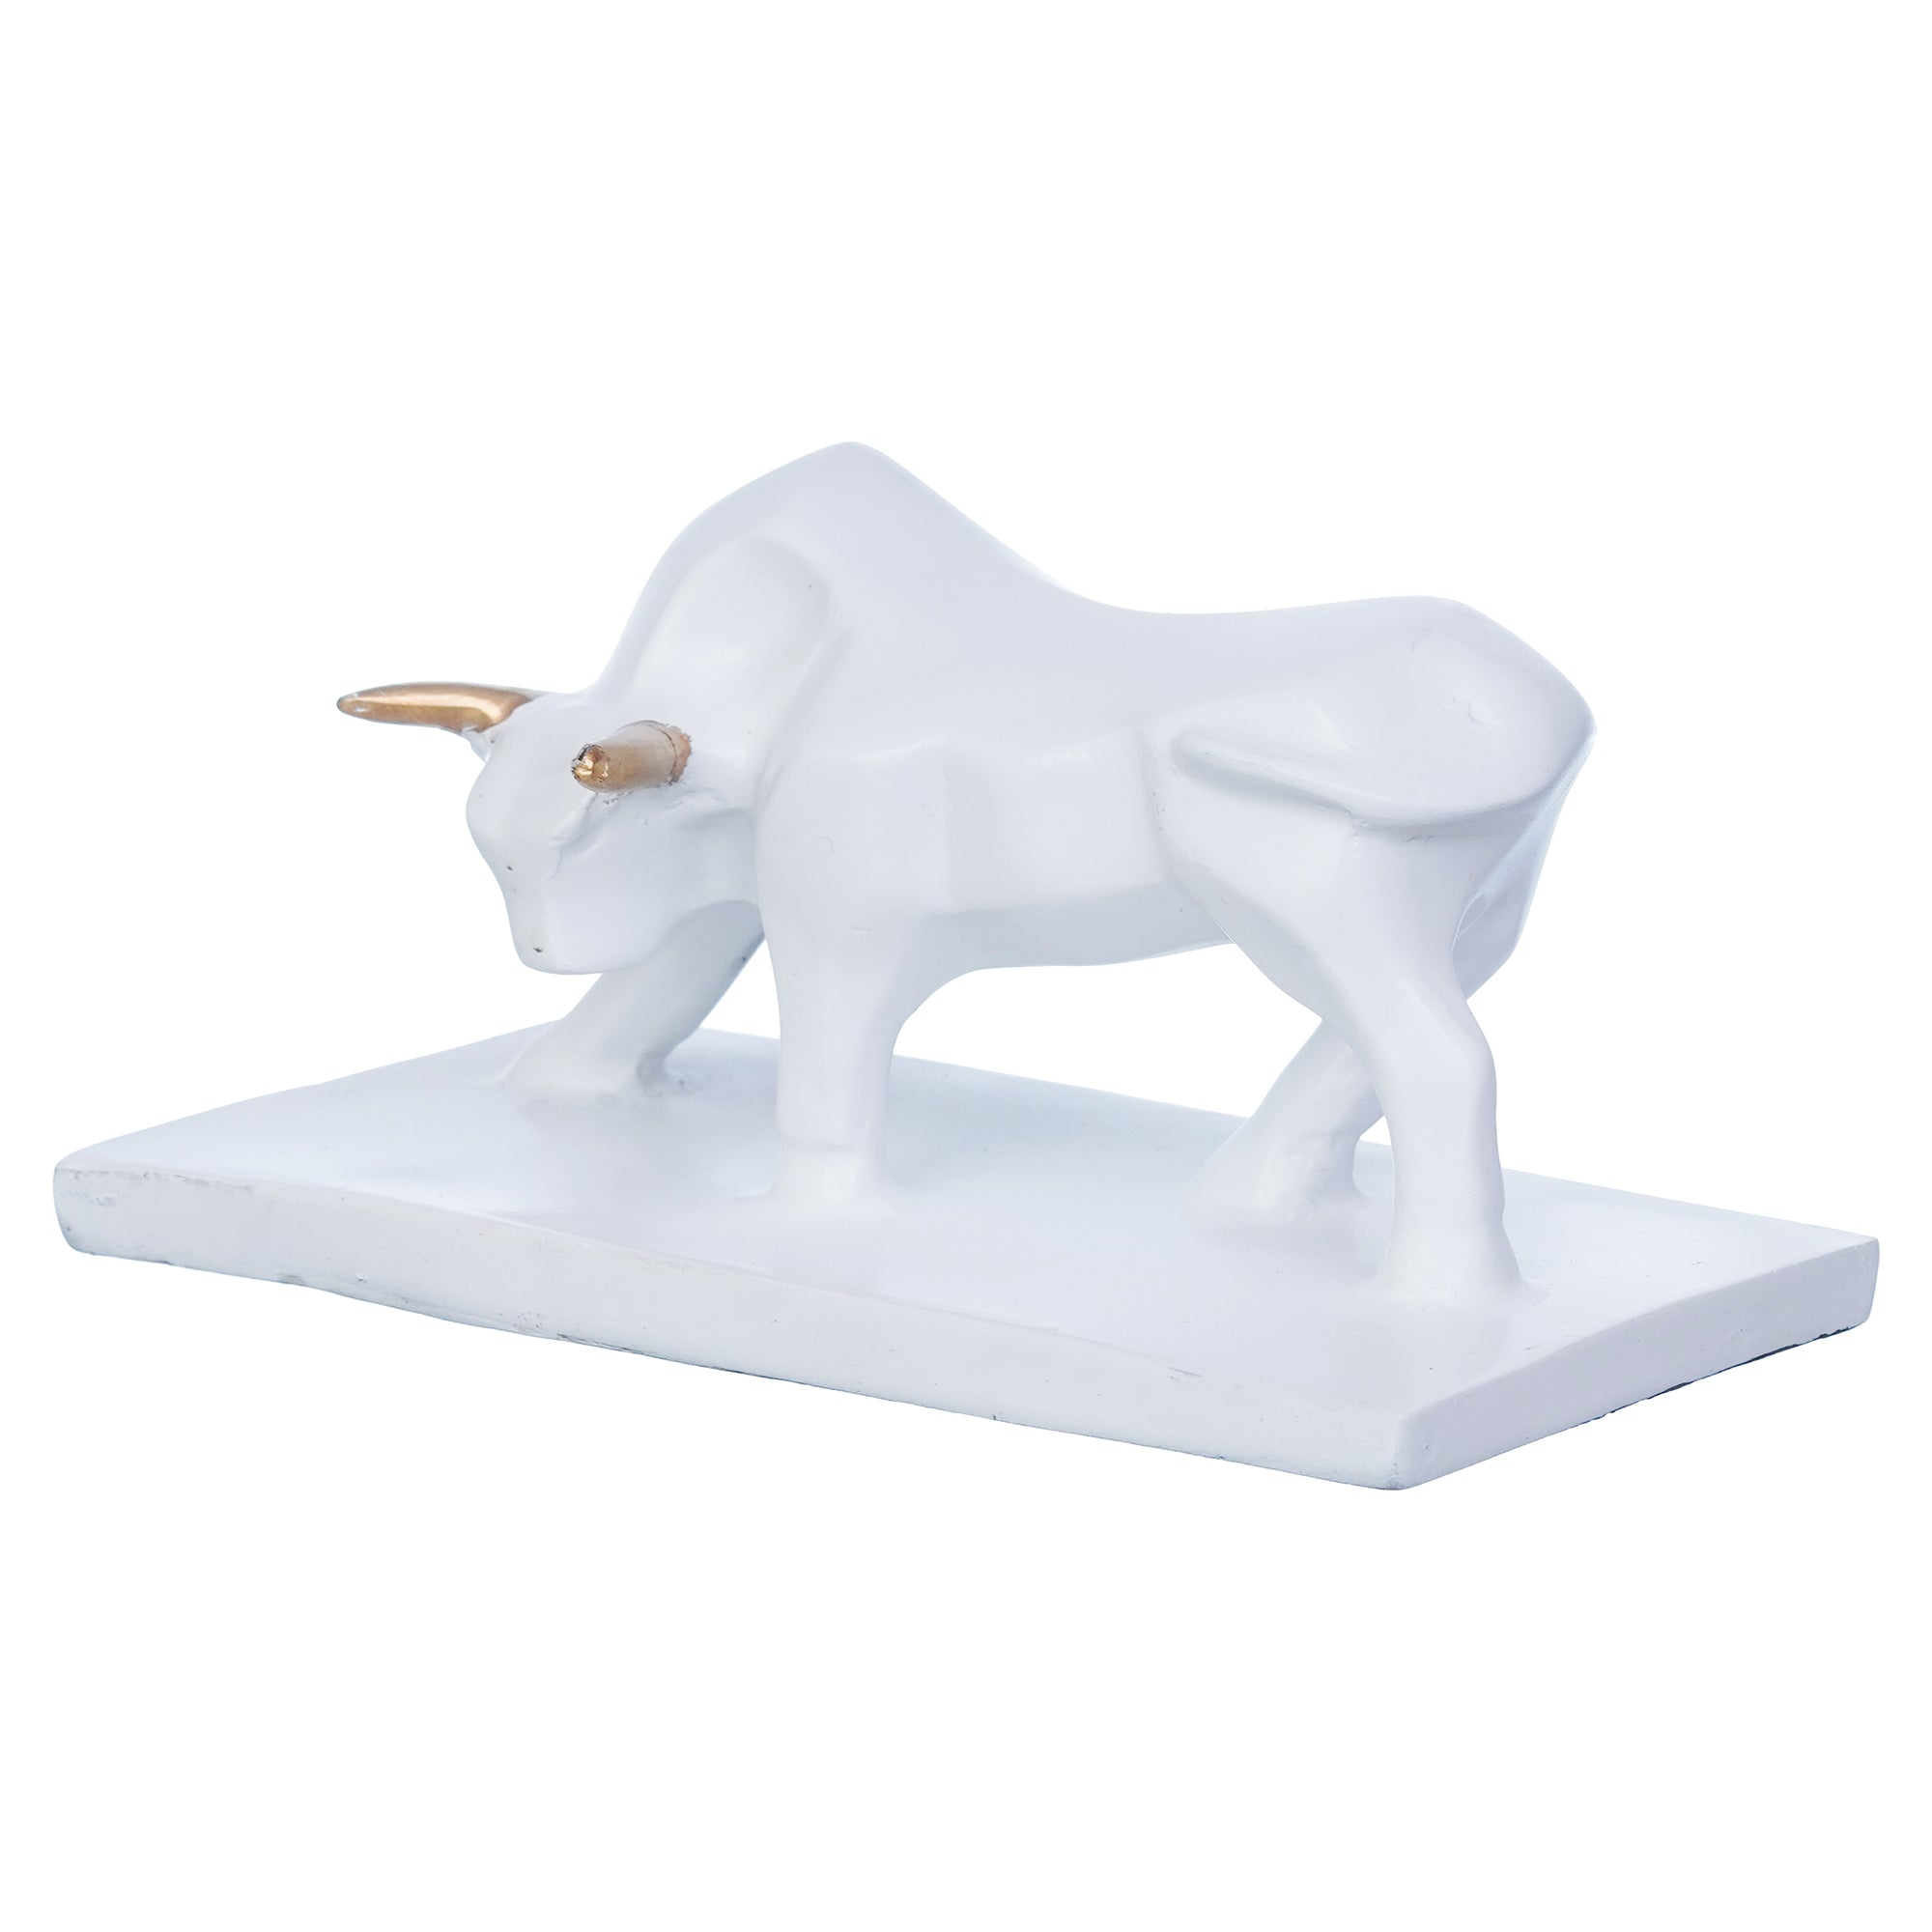 White Polyresin Majestic Charging Bull Statue for Home, Office Decoration 7